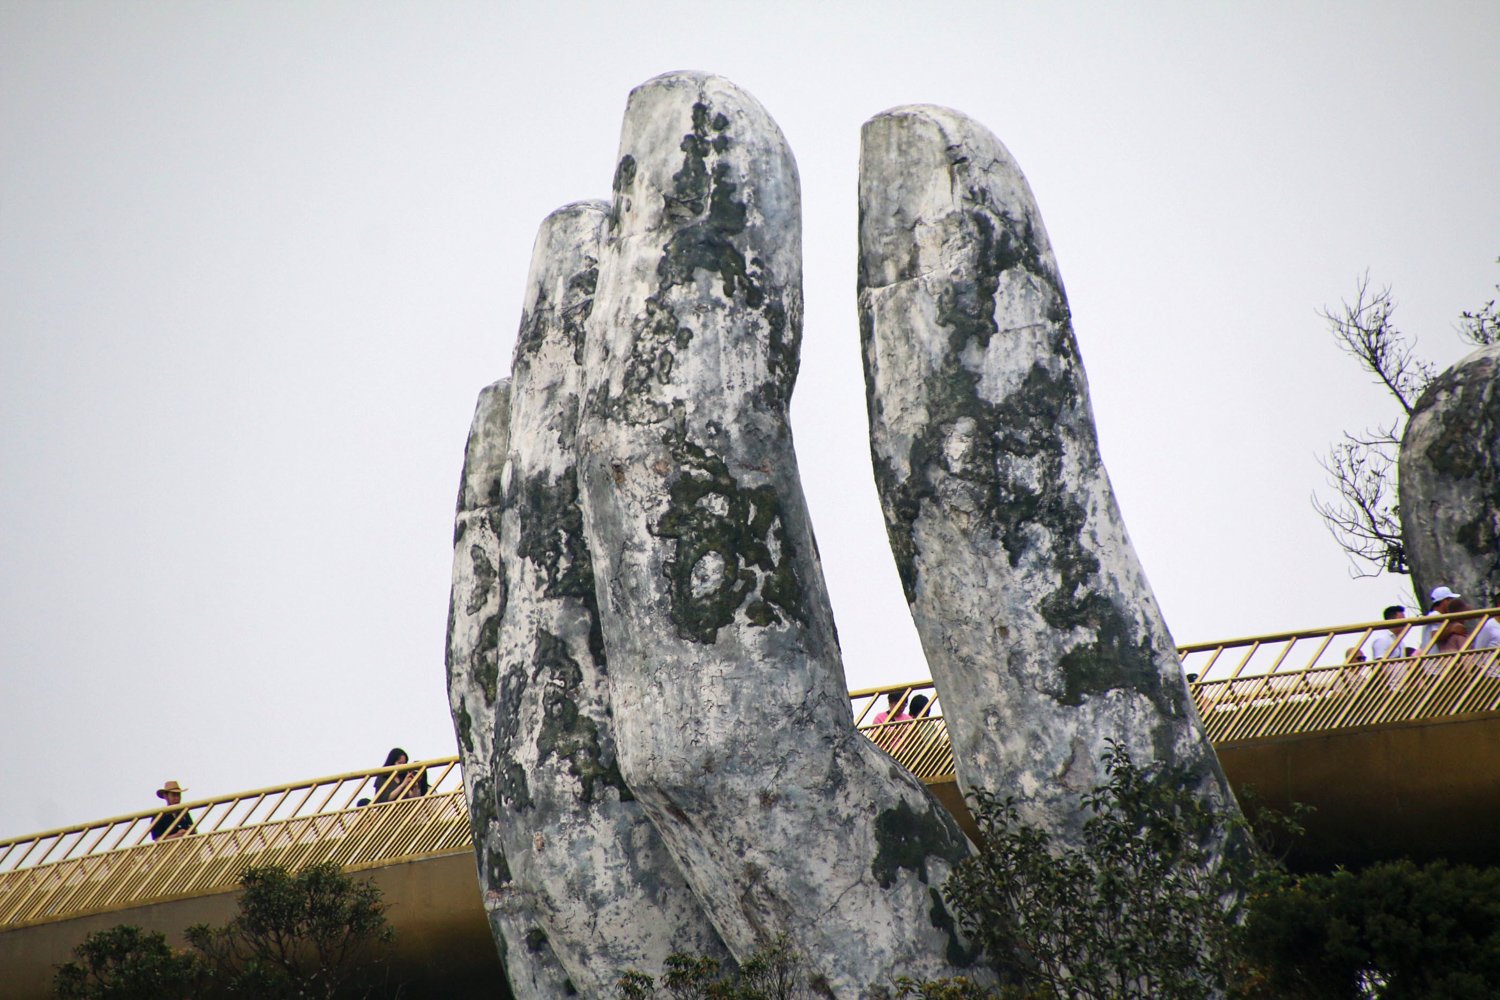 The sheer size of the fingers is part of the fascinating draw of the bridge.